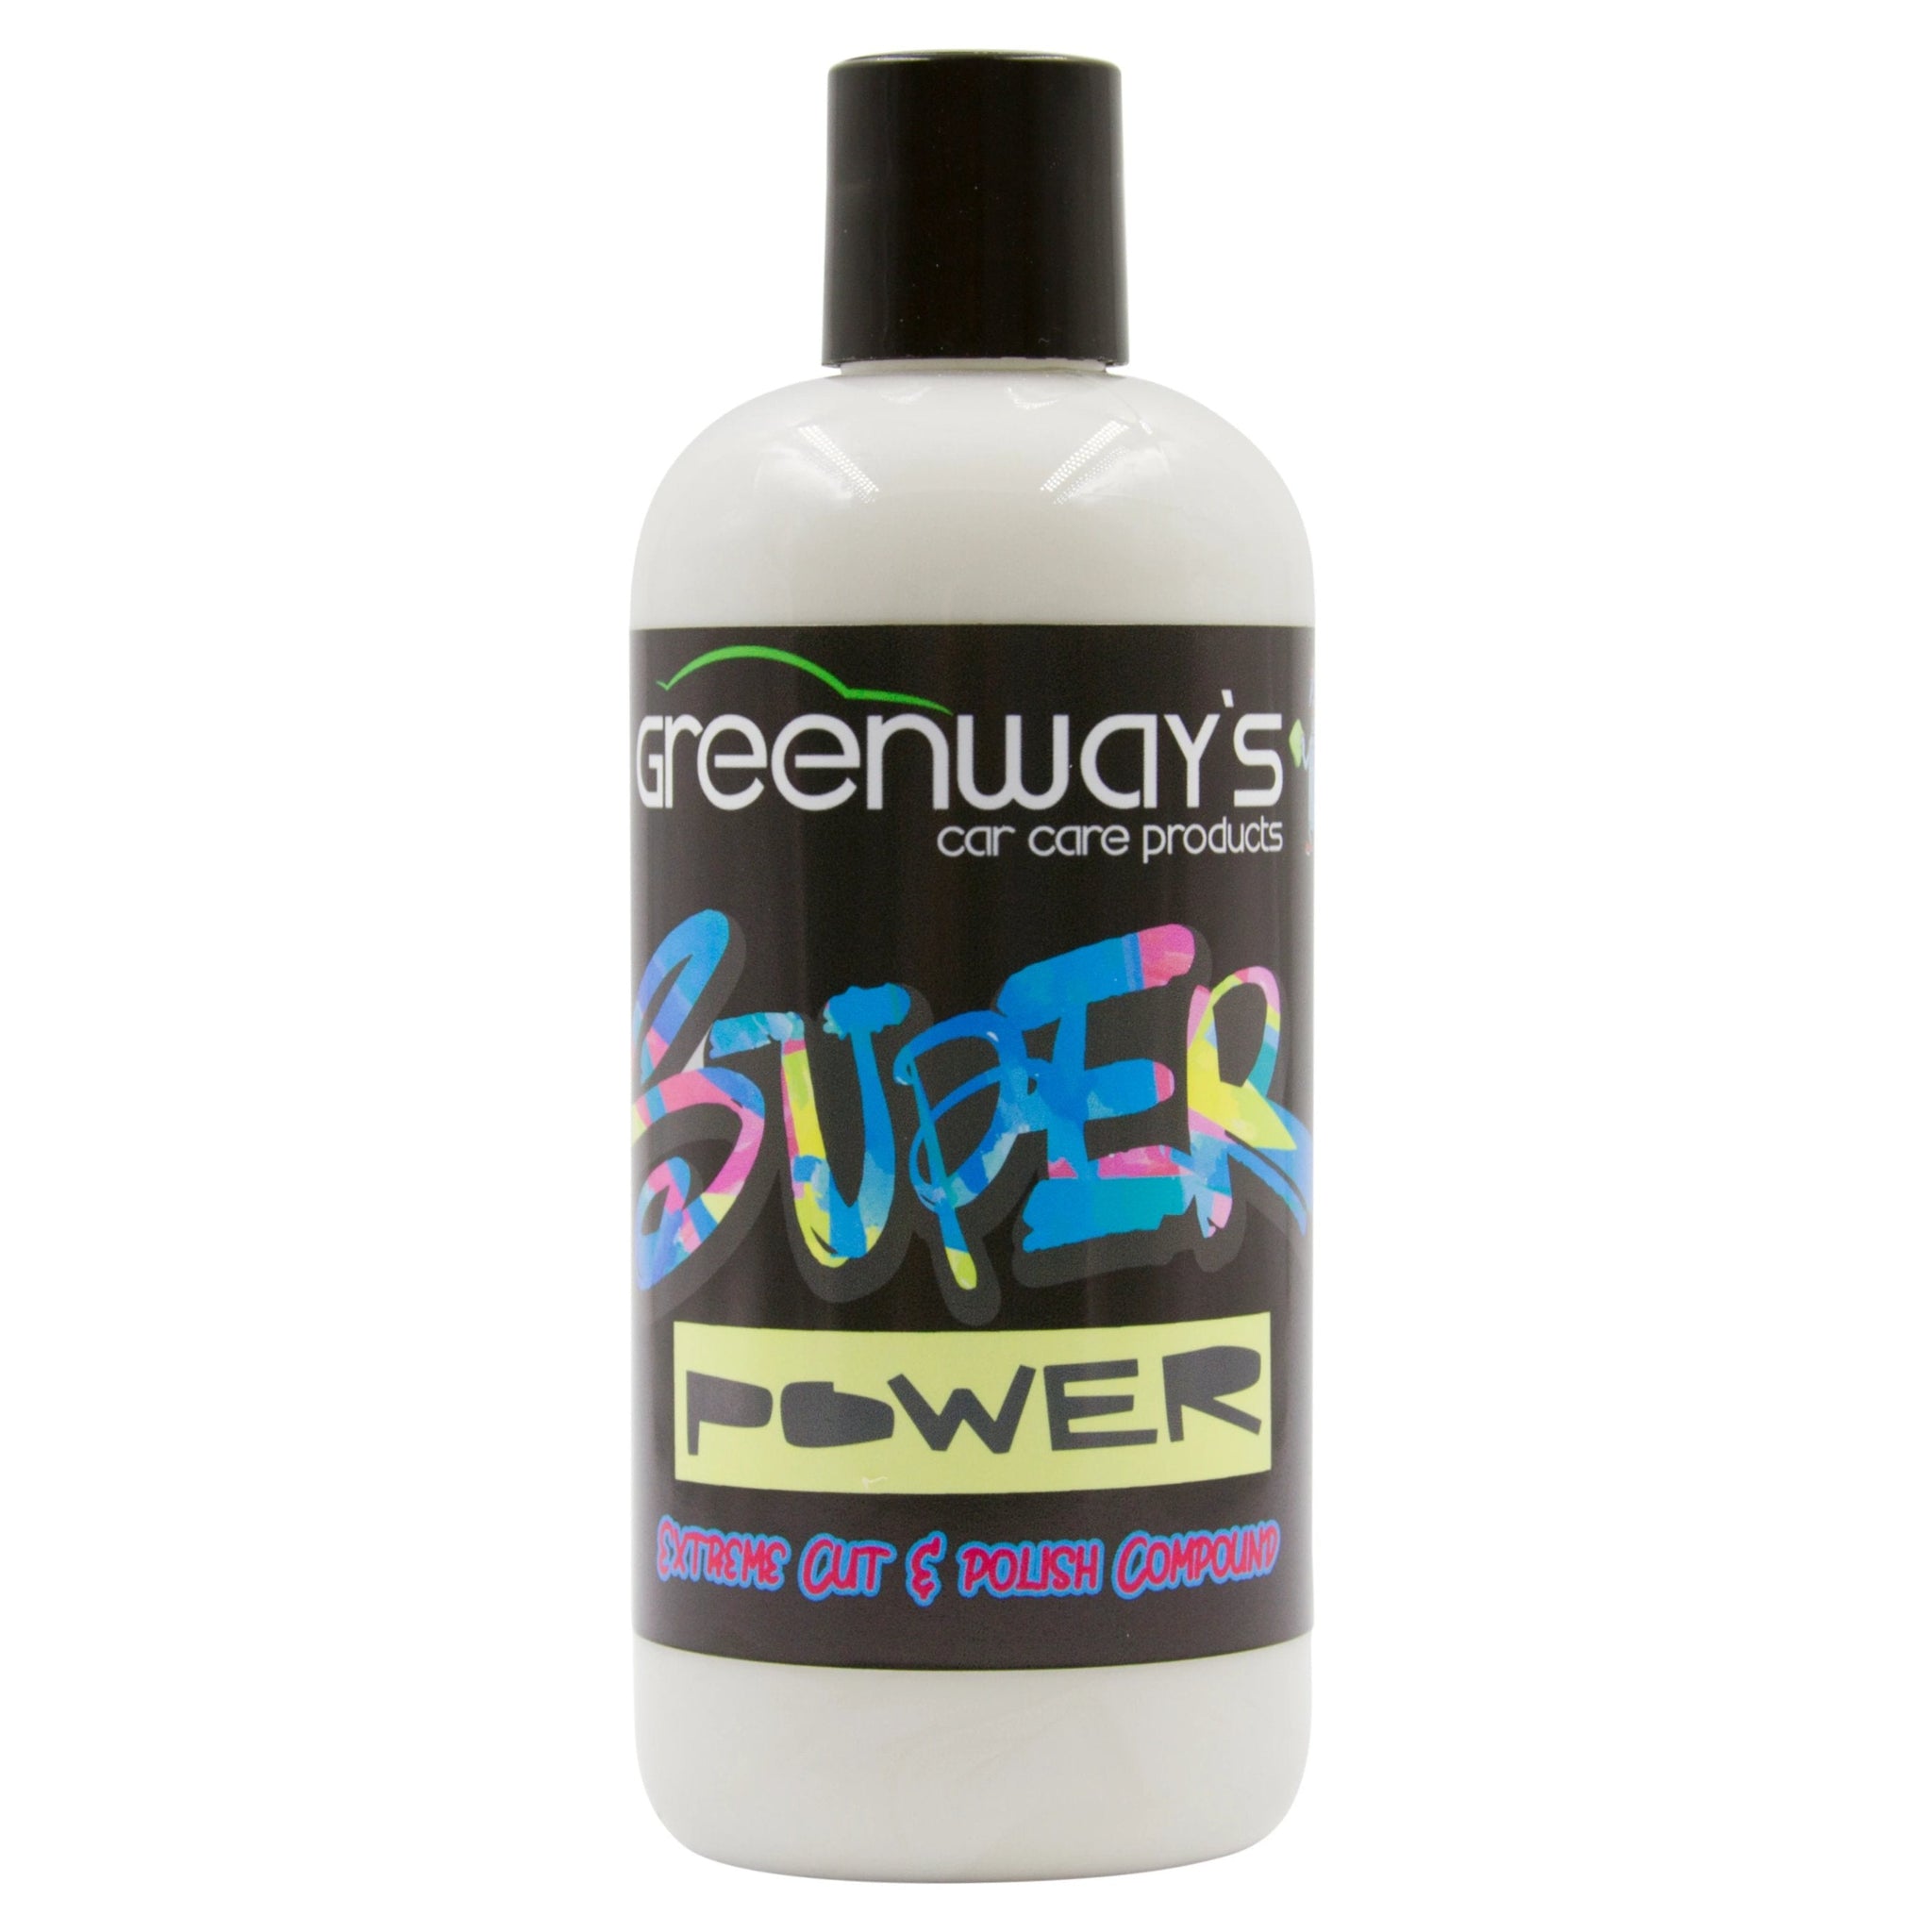 Greenway’s Super Power heavy scratch, major defect, highly aggressive cutting compound, light polisher, wax free, 16 ounces.